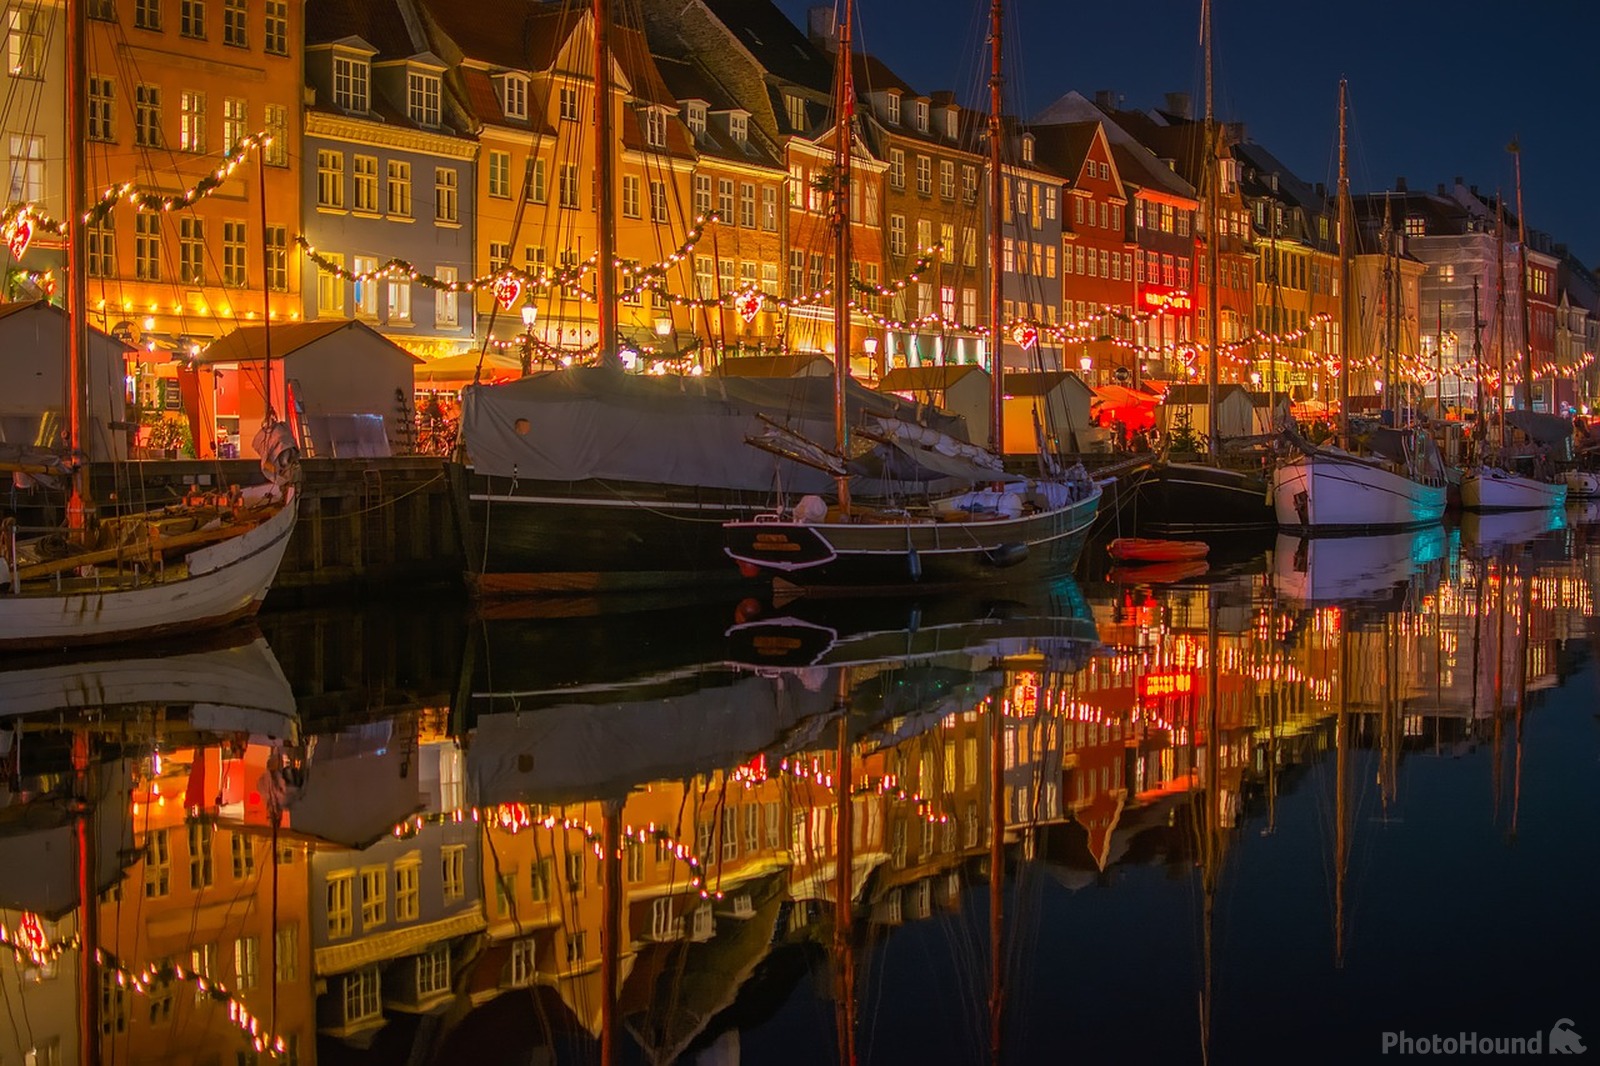 Image of Nyhavn Canal by Team PhotoHound